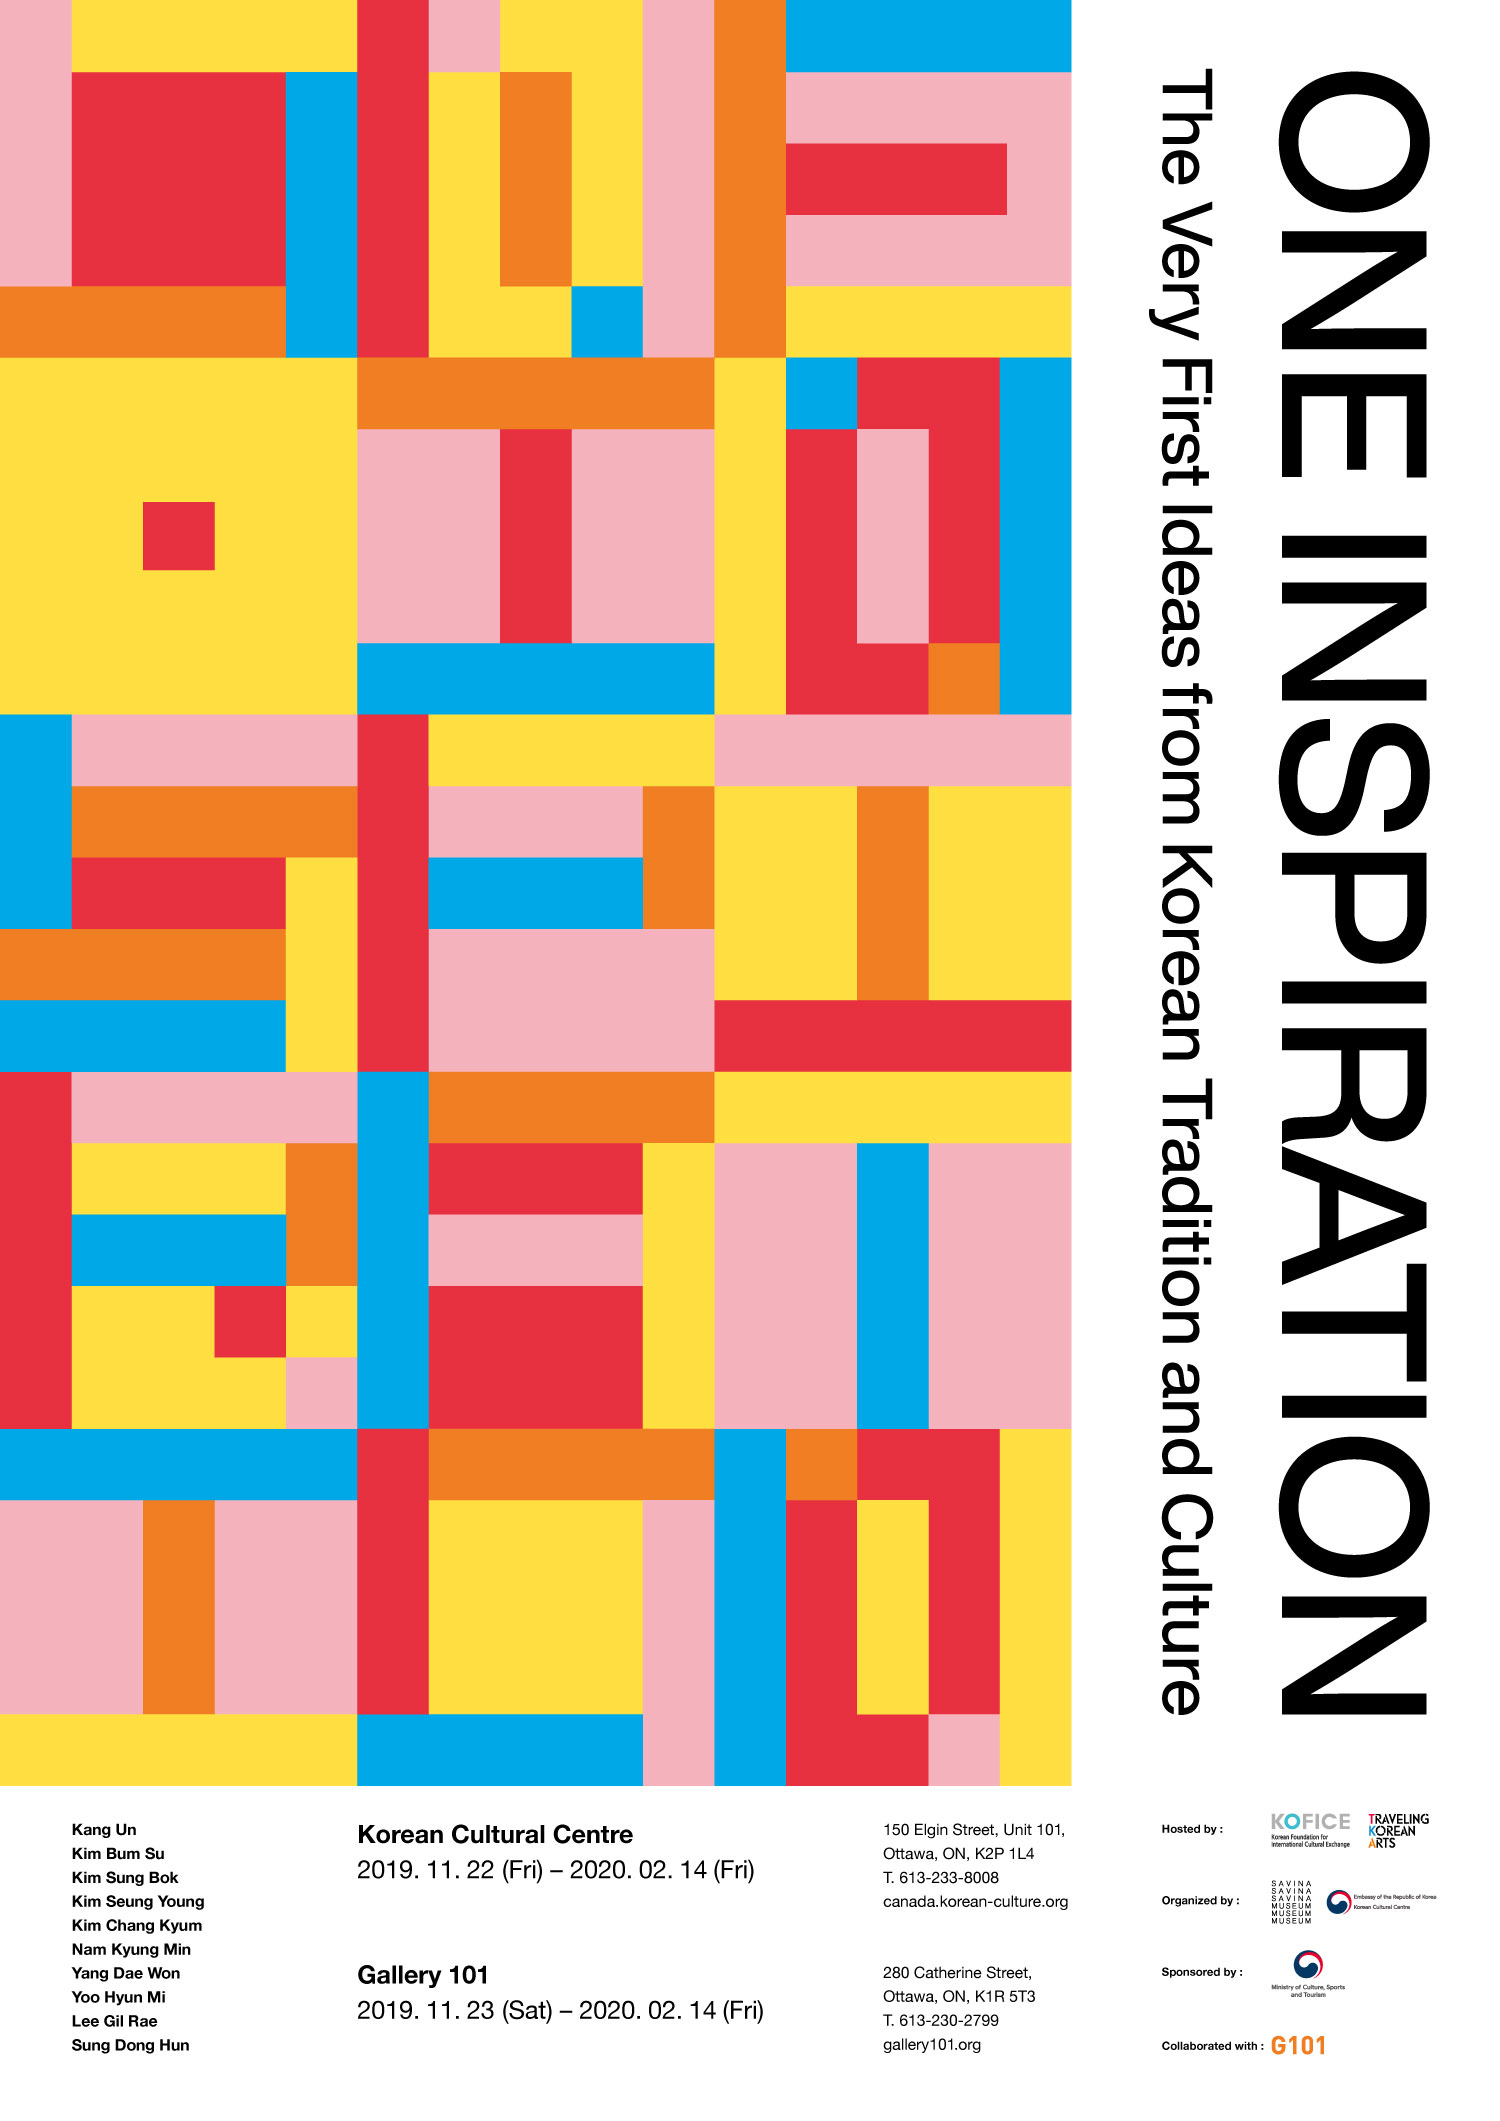 One Inspiration Exhibition Poster courtesy of the Korean Cultural Centre